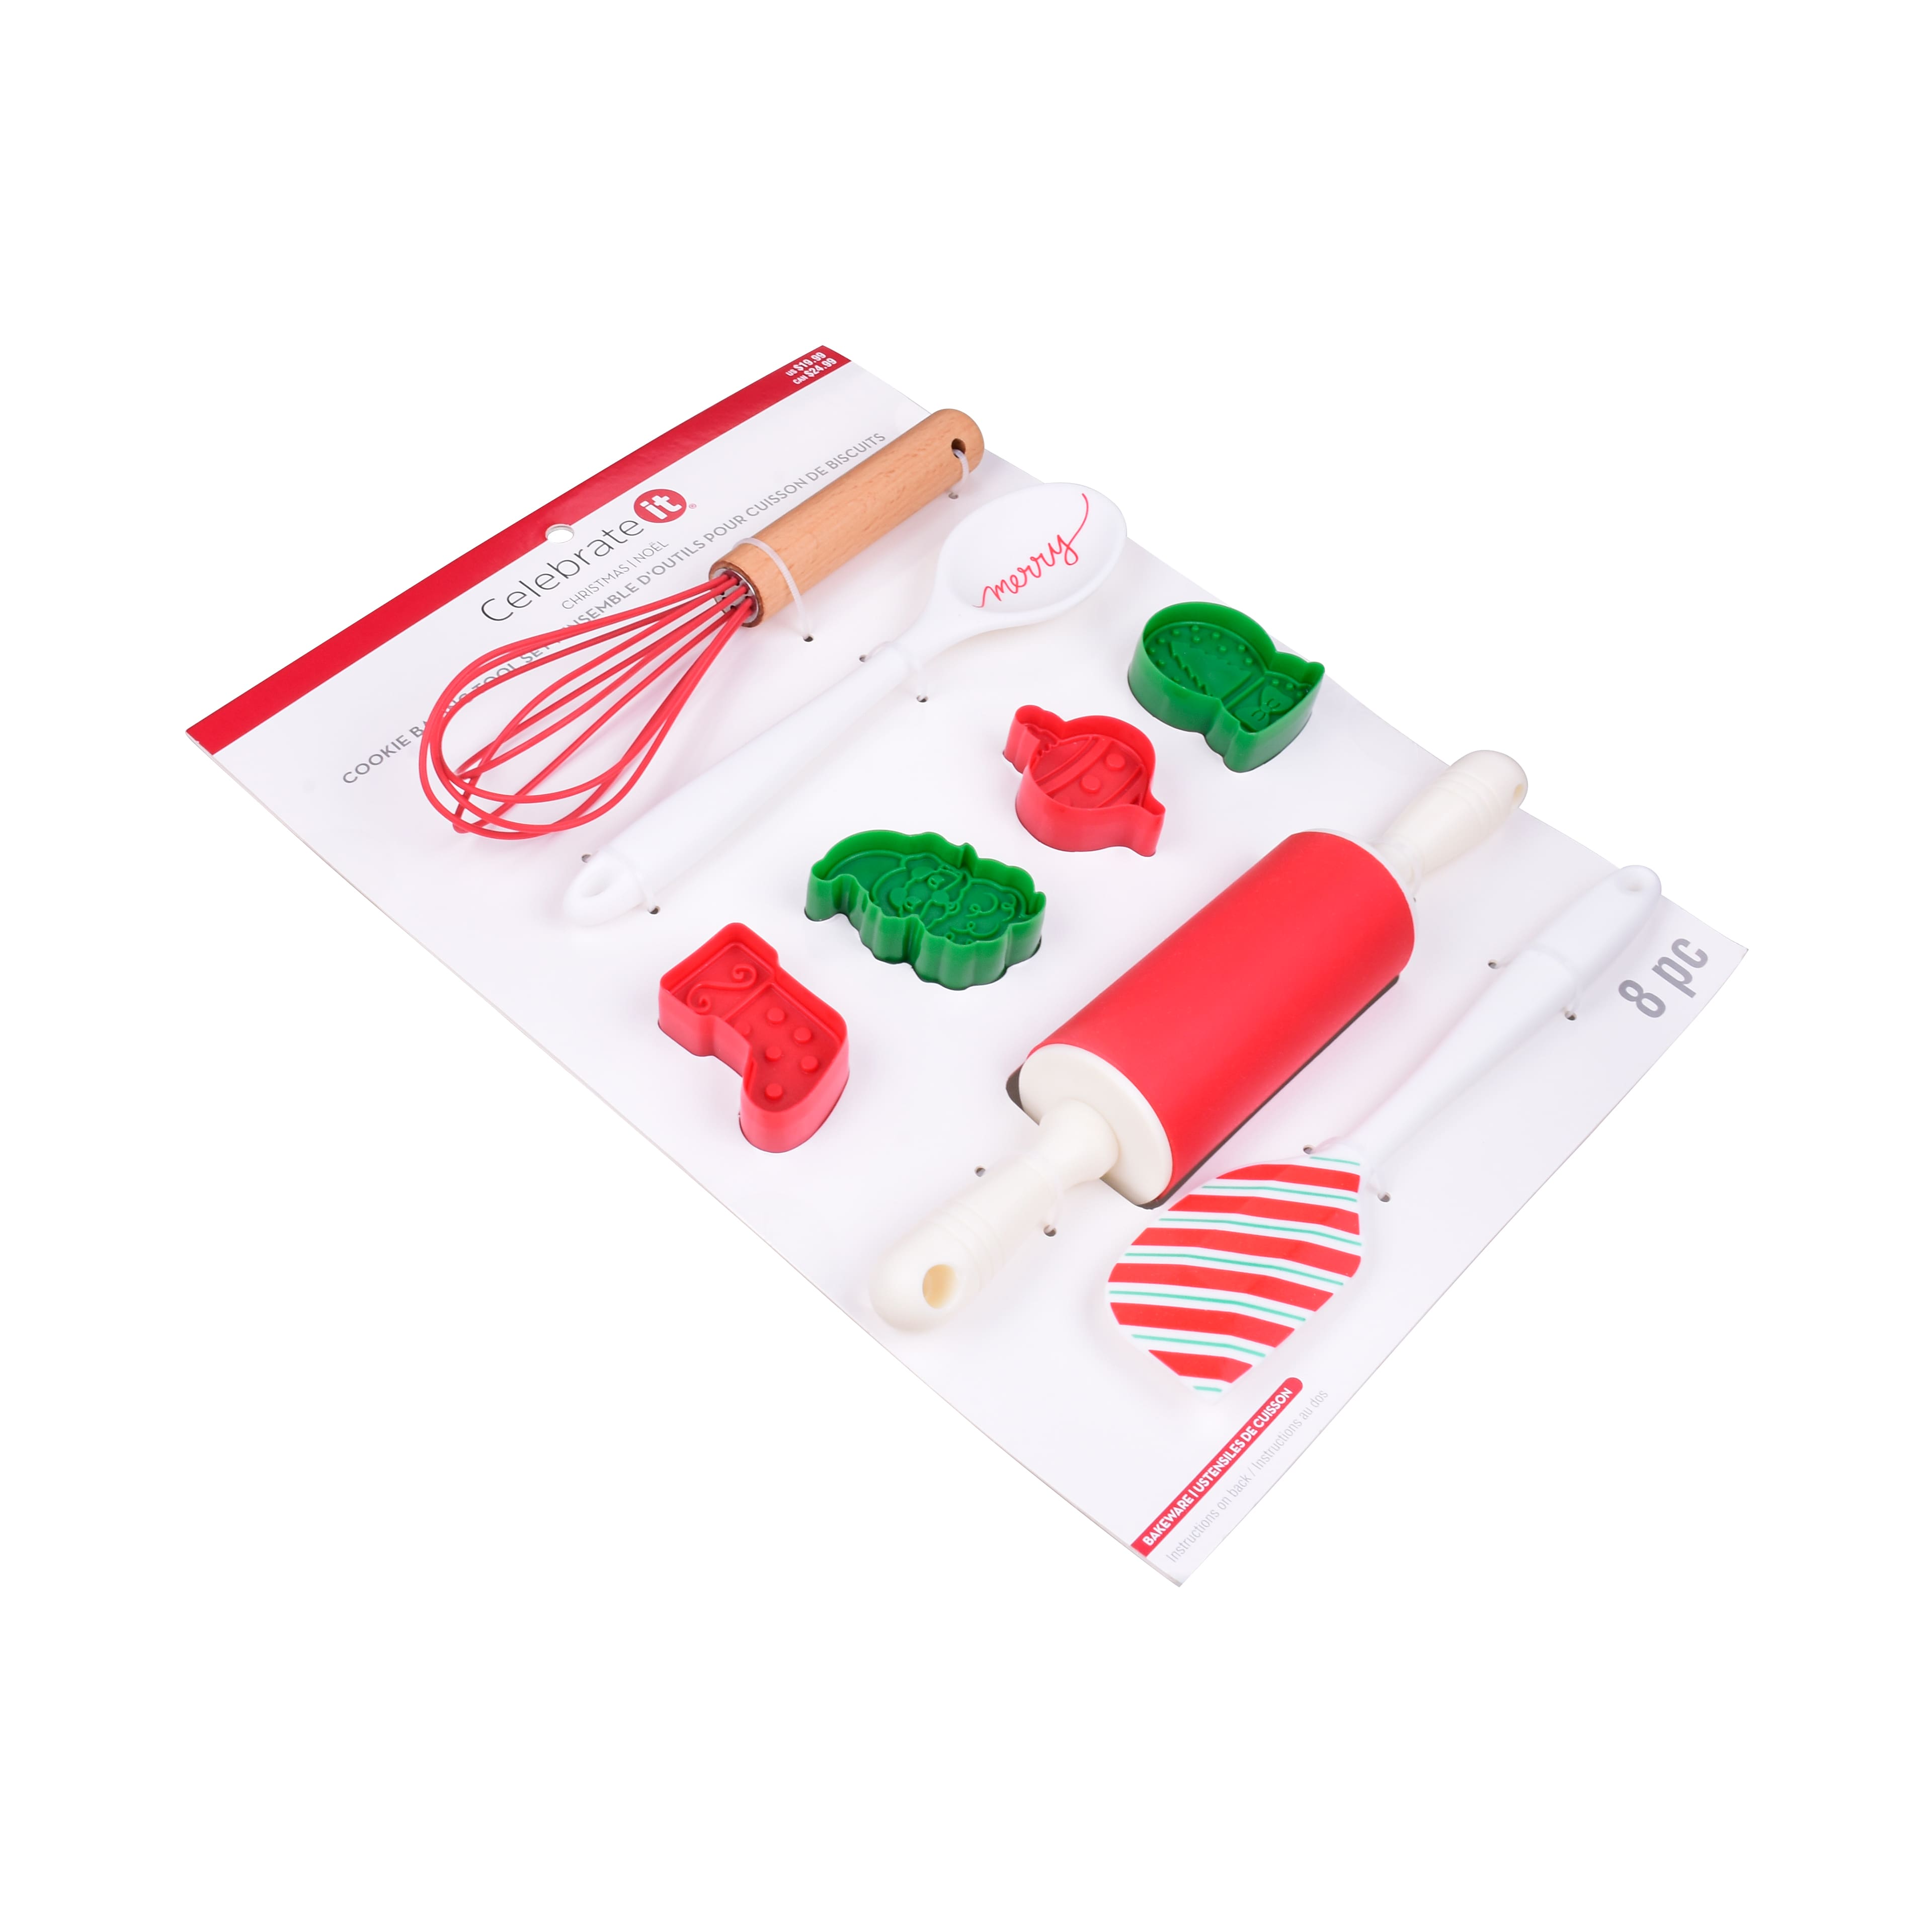 Christmas Cookie Baking Set by Celebrate It®